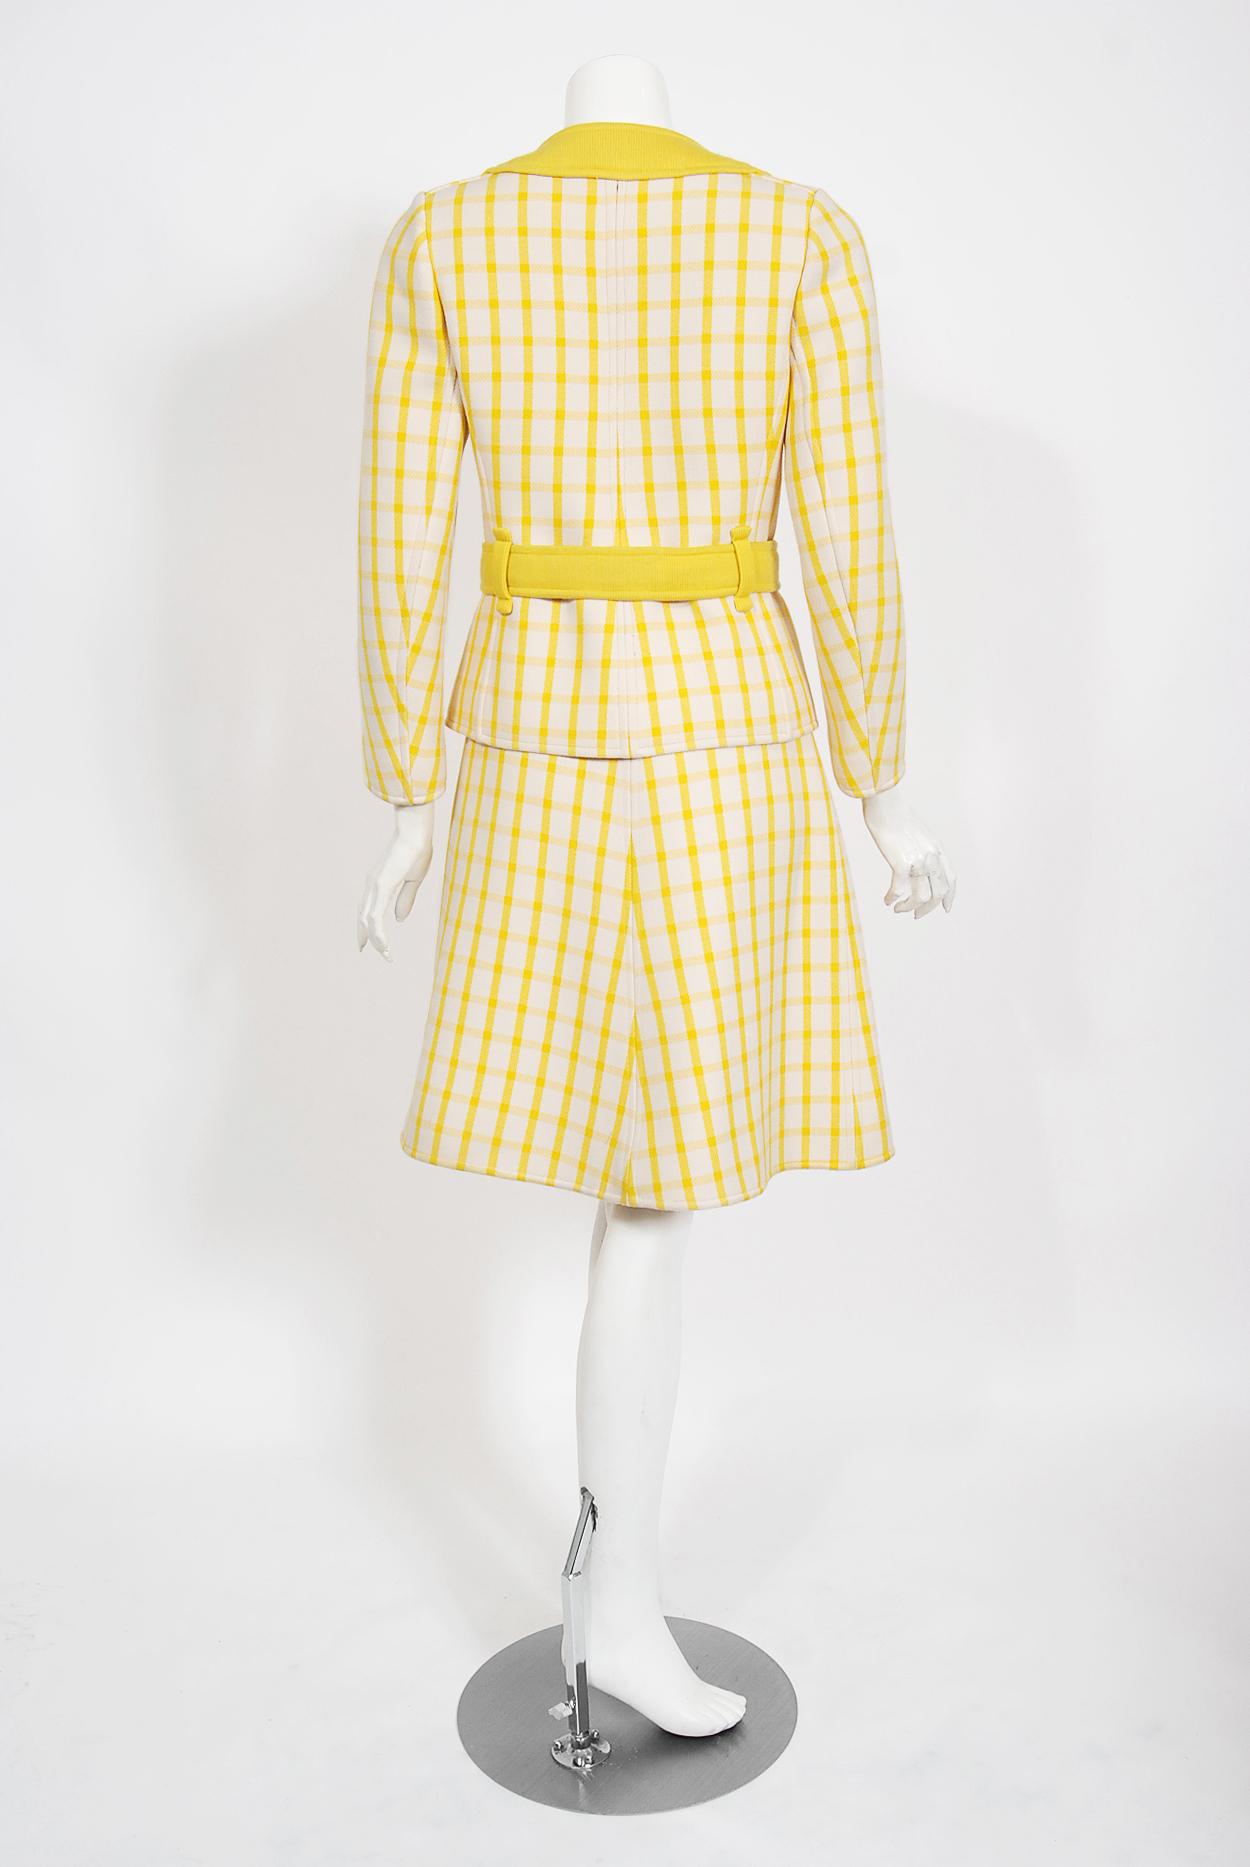 Vintage 1967 Courreges Couture Yellow White Checkered Wool Belted Jacket & Skirt For Sale 3